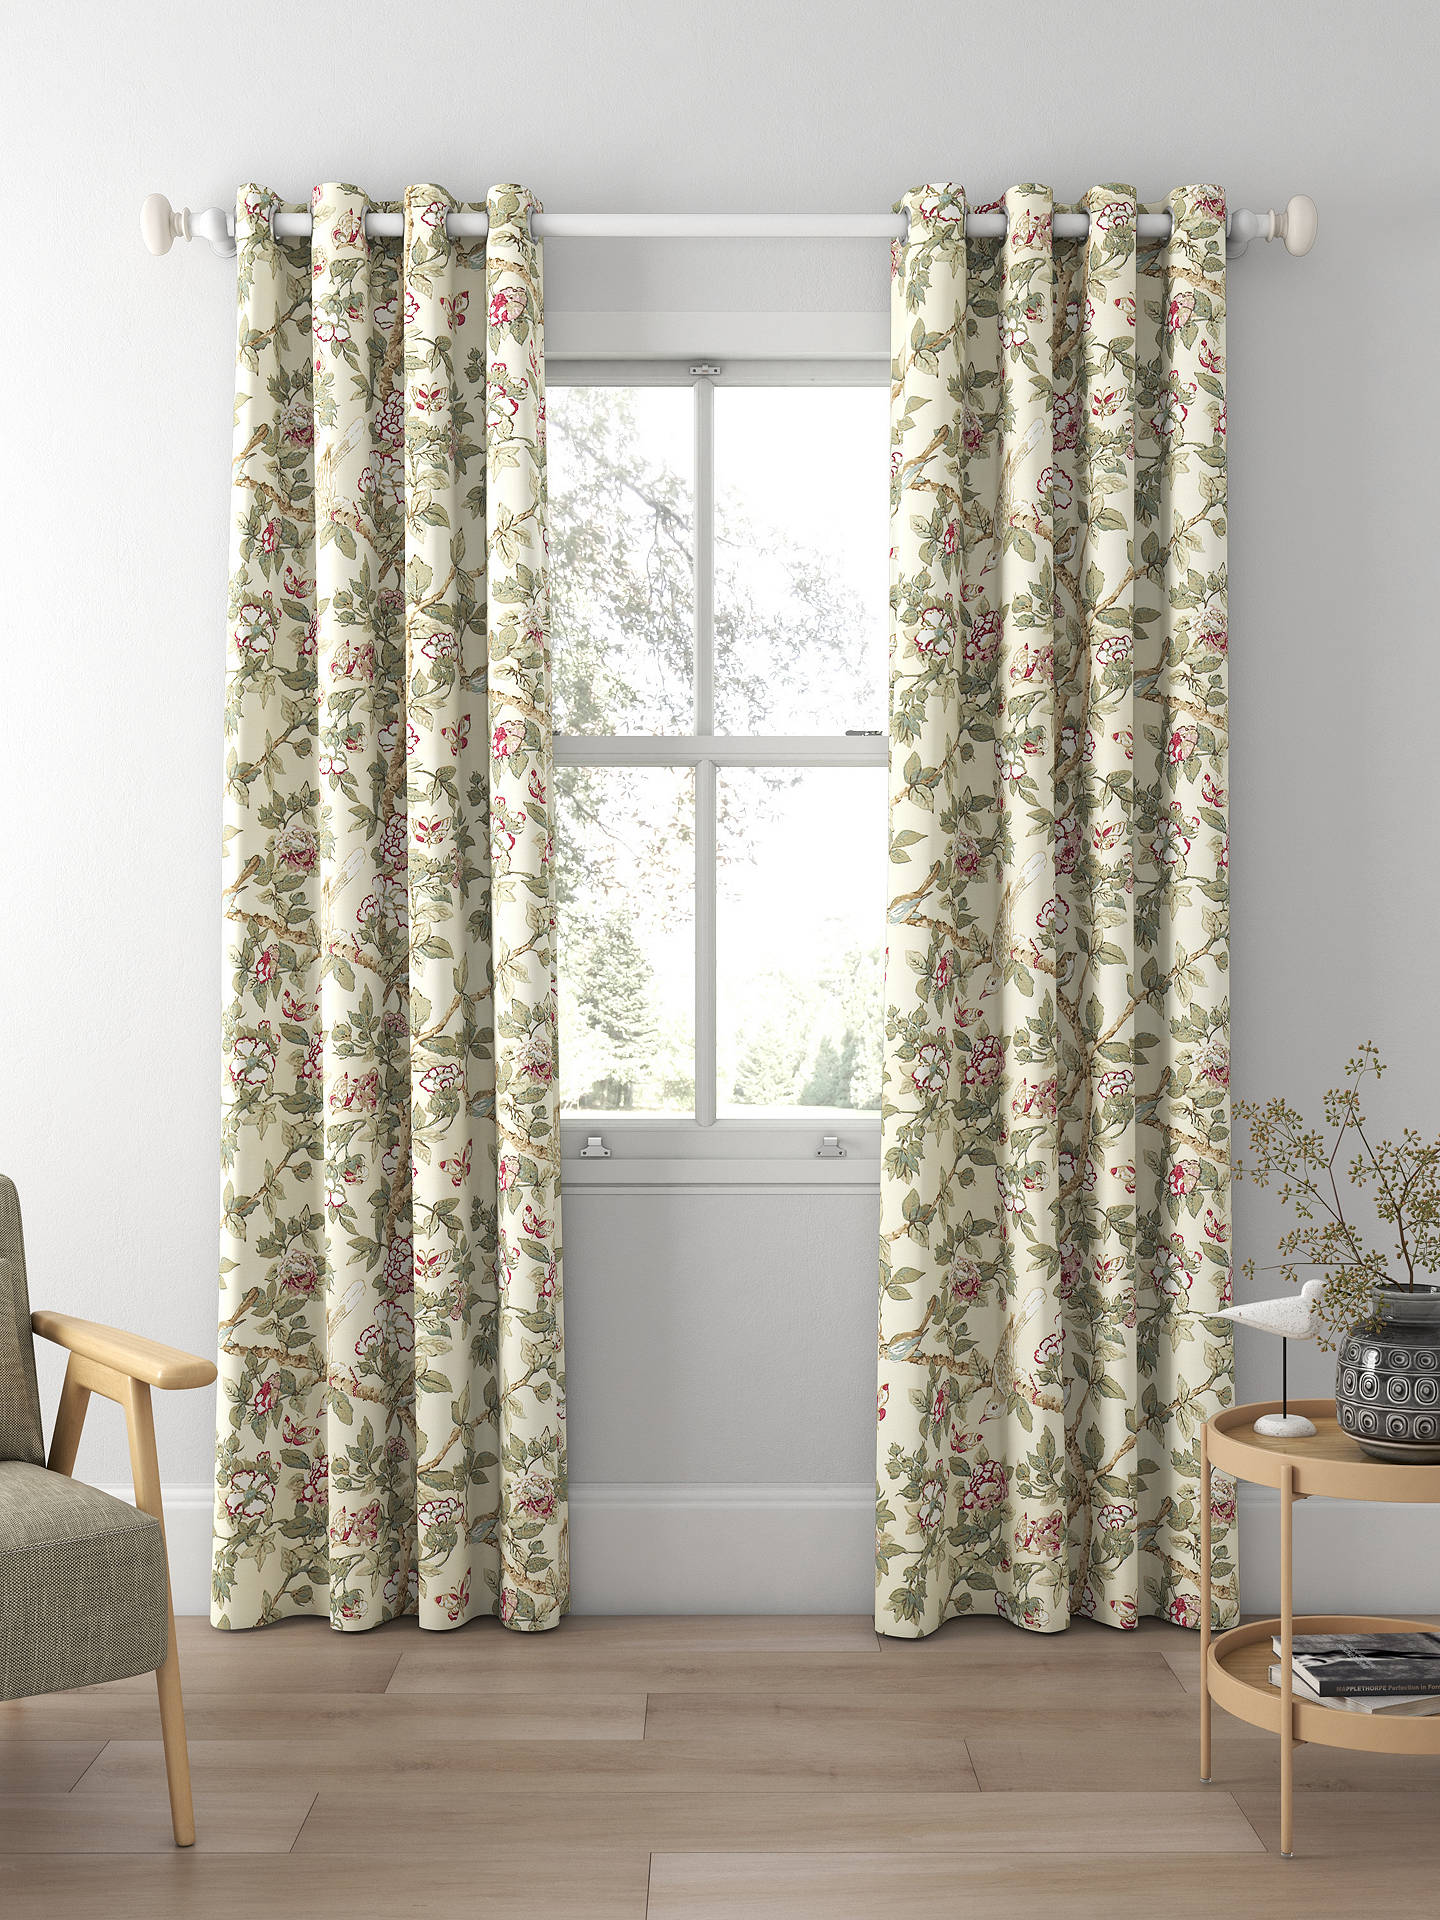 Sanderson Caverley Rose Made to Measure Curtains, Rose/Pewter